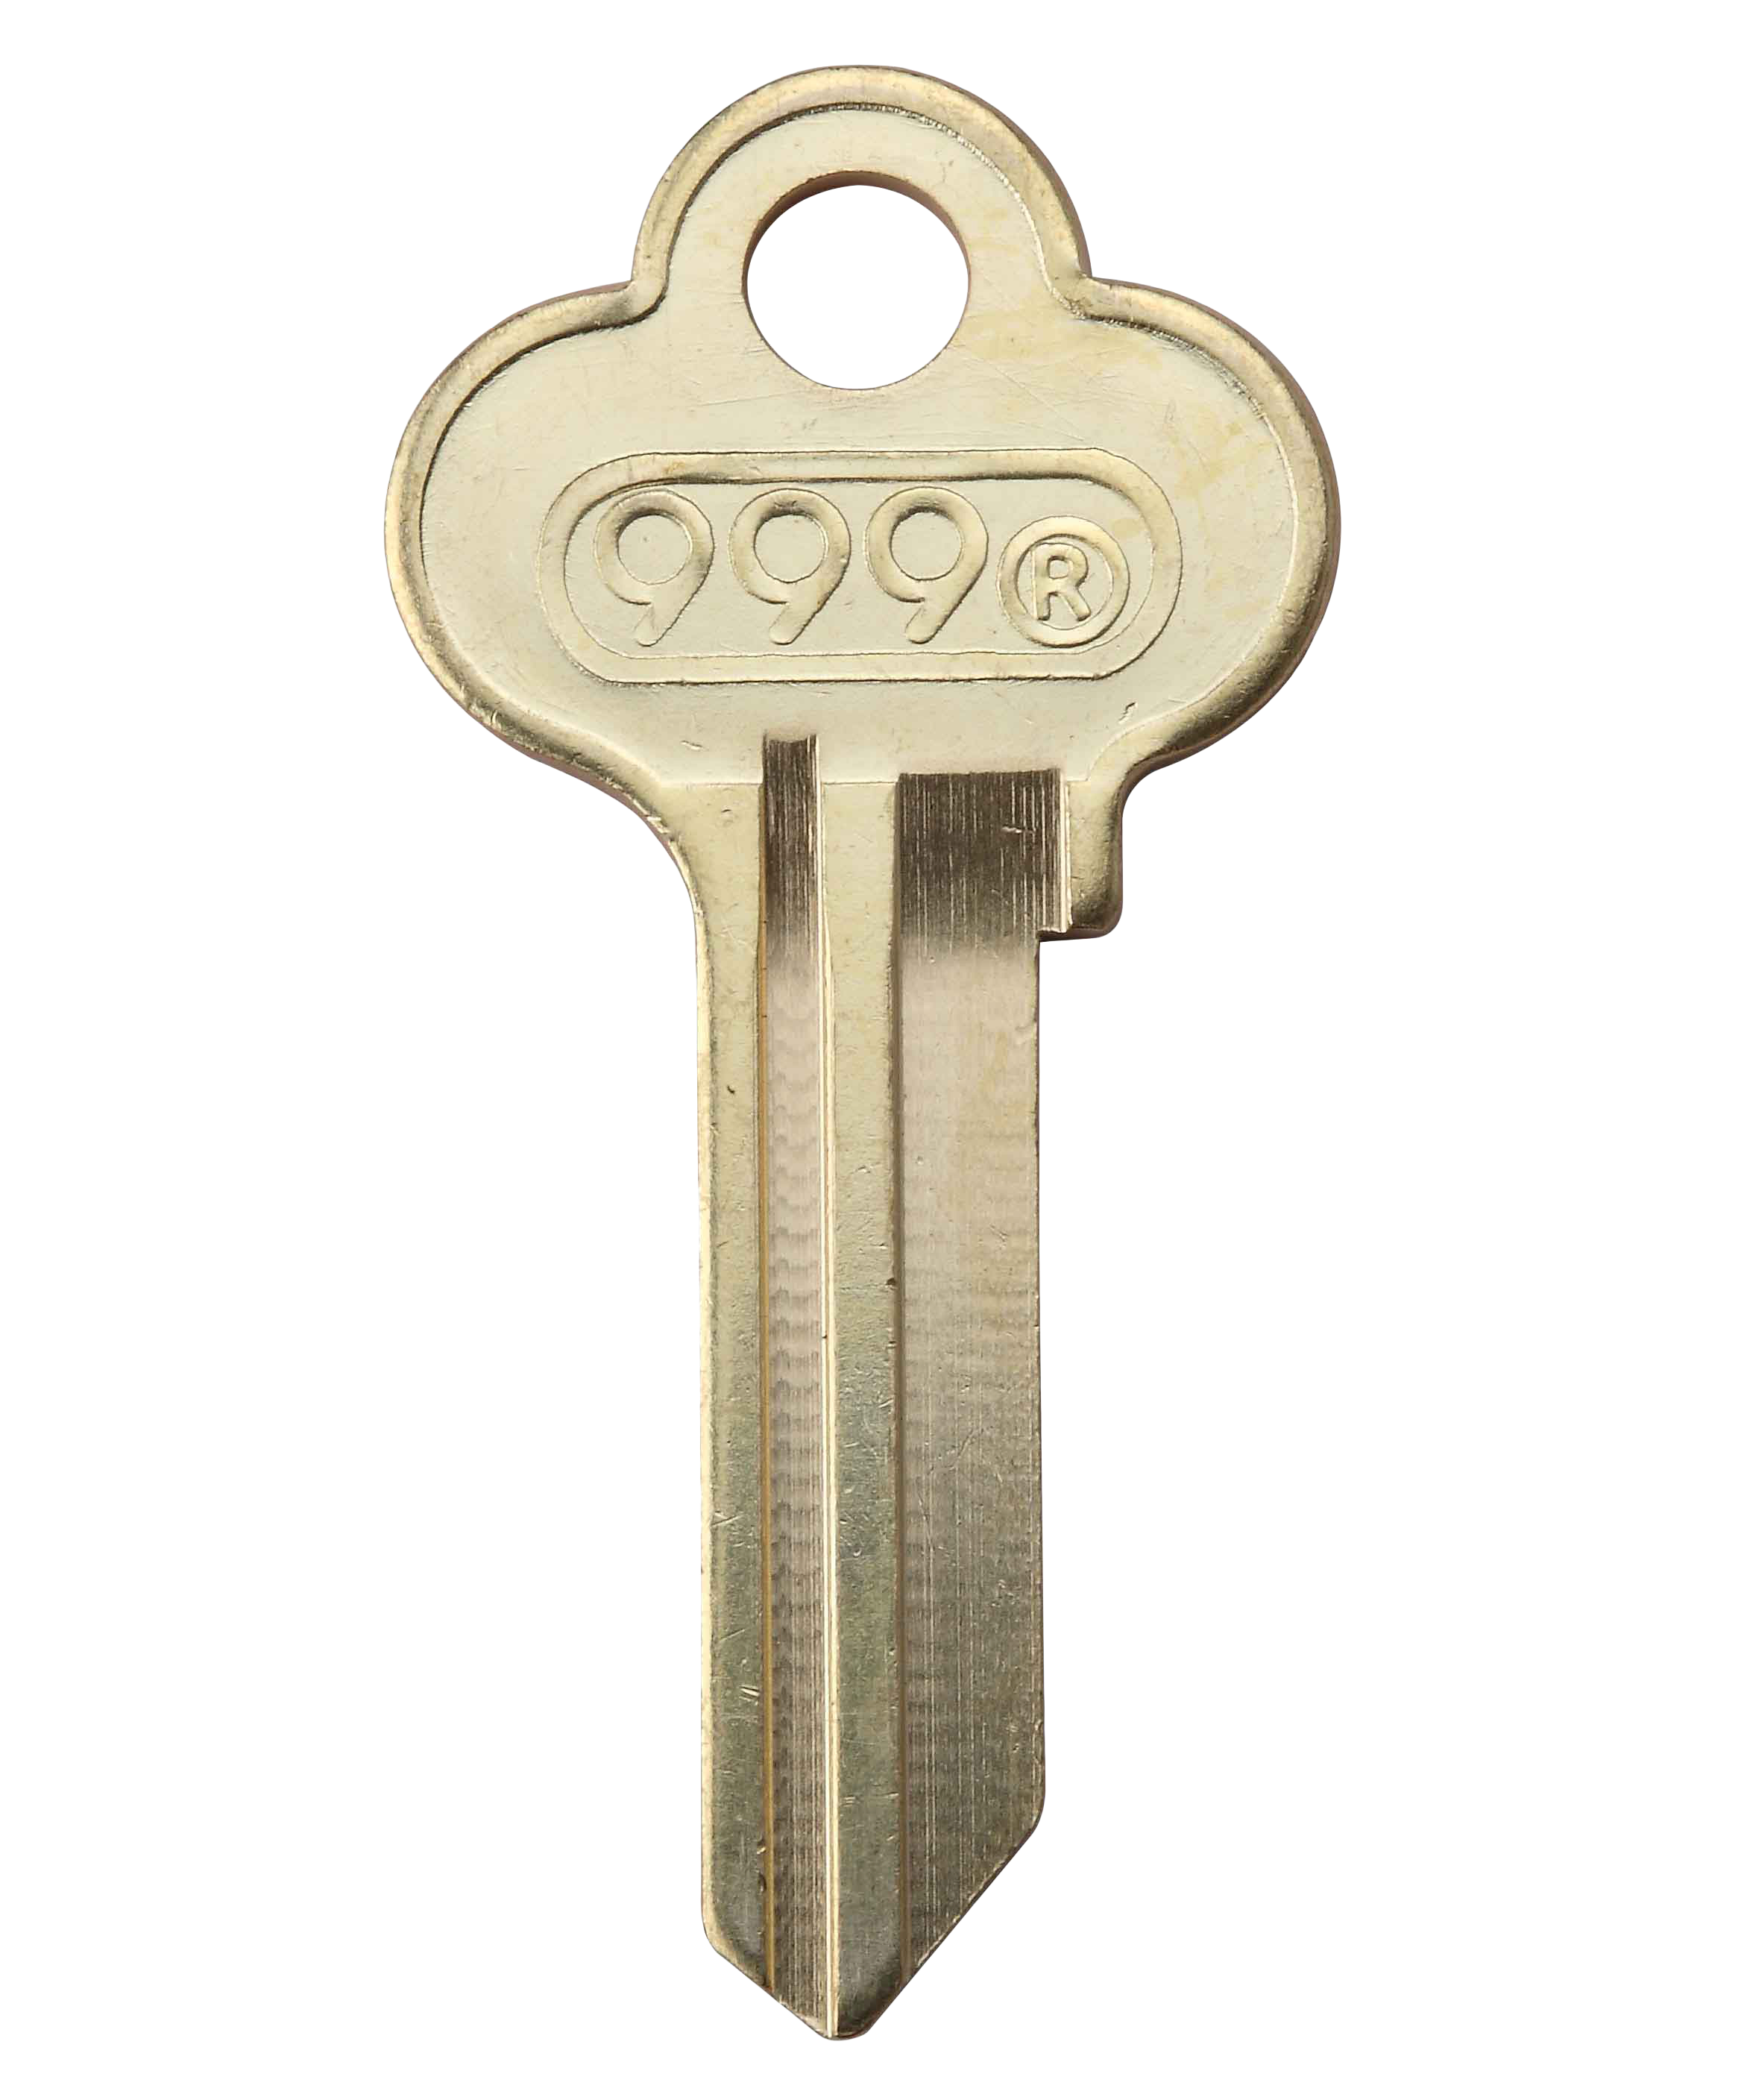 A Key With Numbers On It